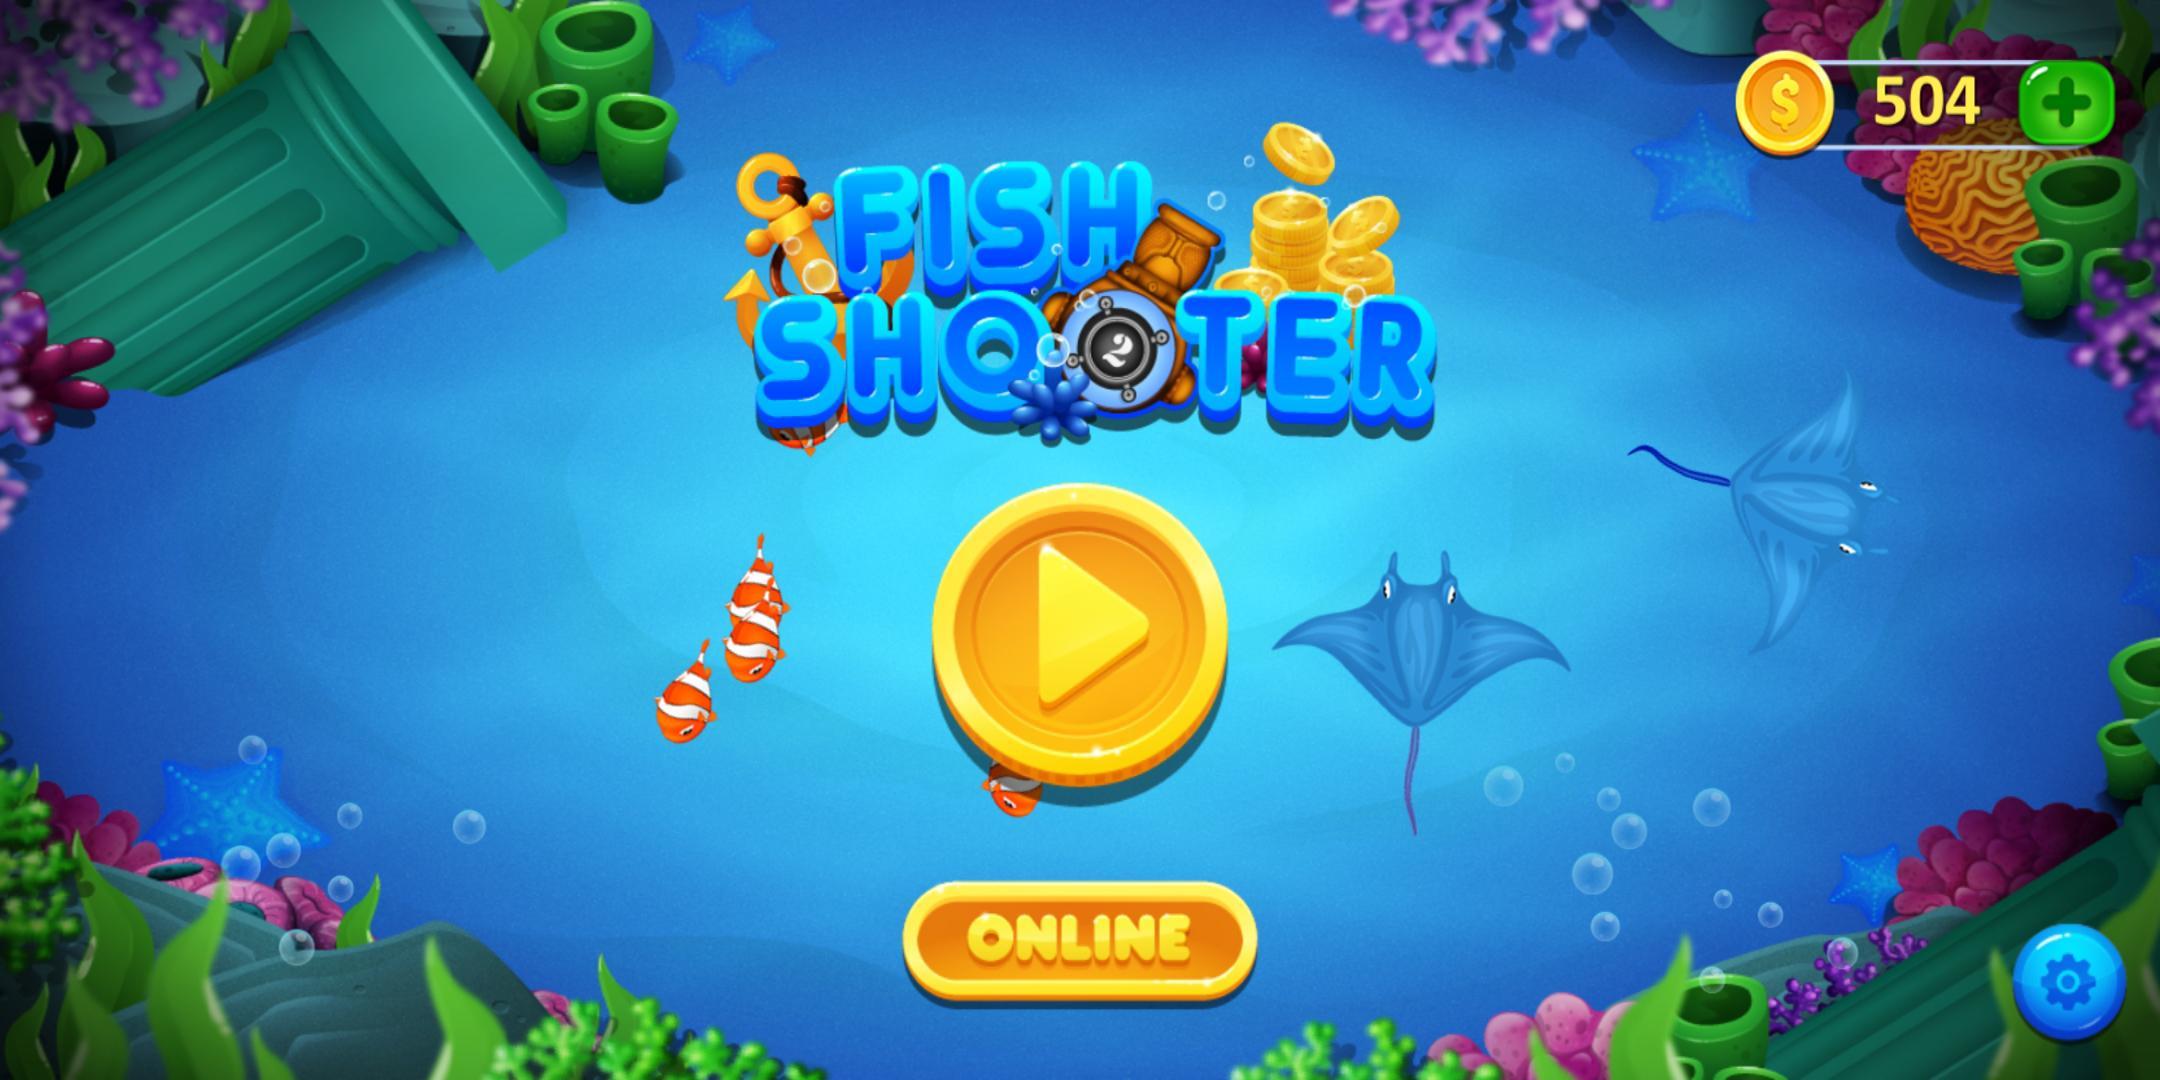 Download Fish Shooter - Fish Hunter android on PC